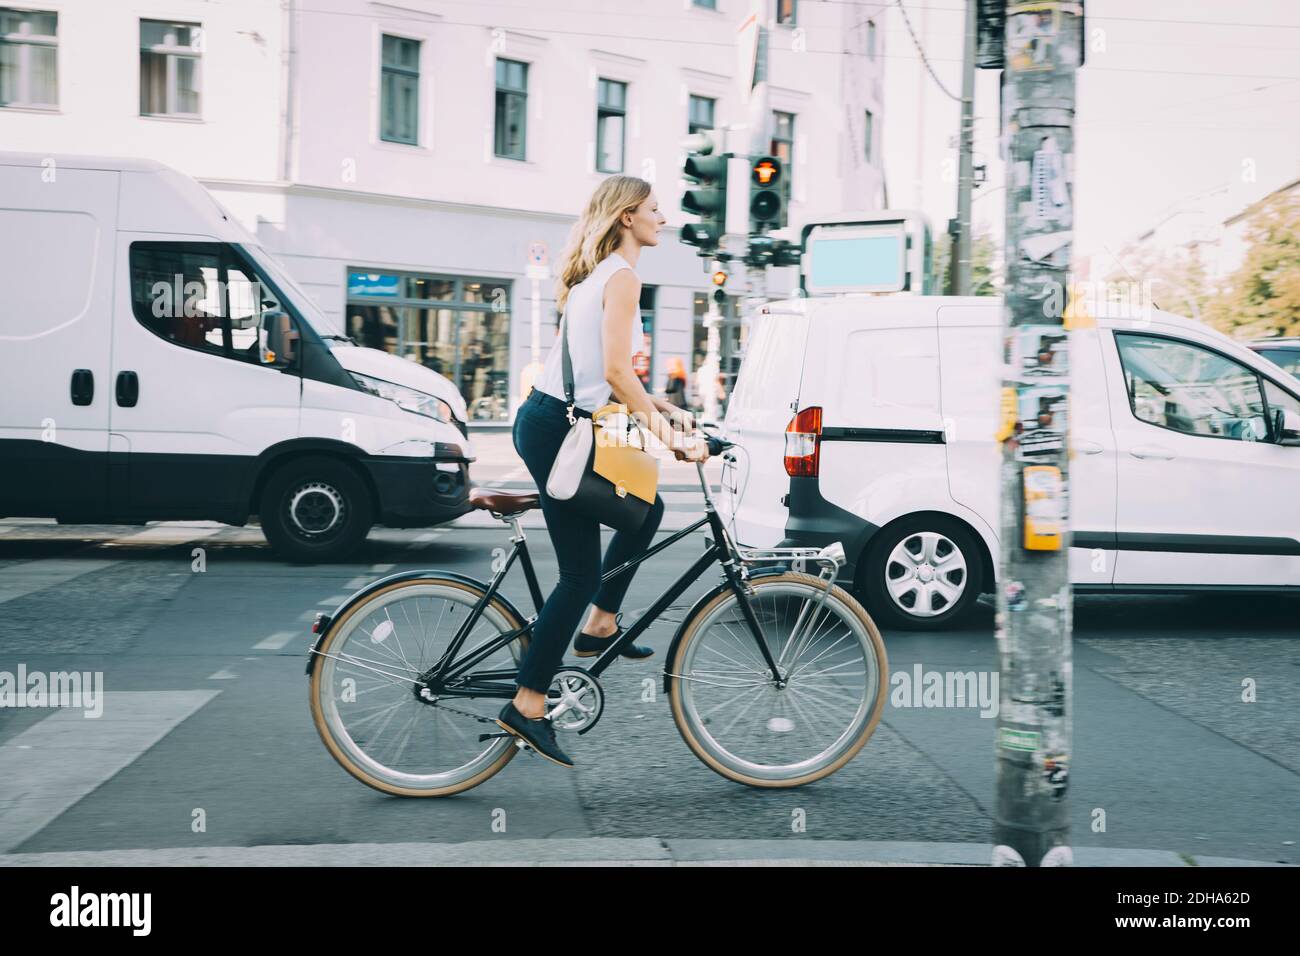 Full length of young businesswoman riding bicycle on road in city Stock Photo